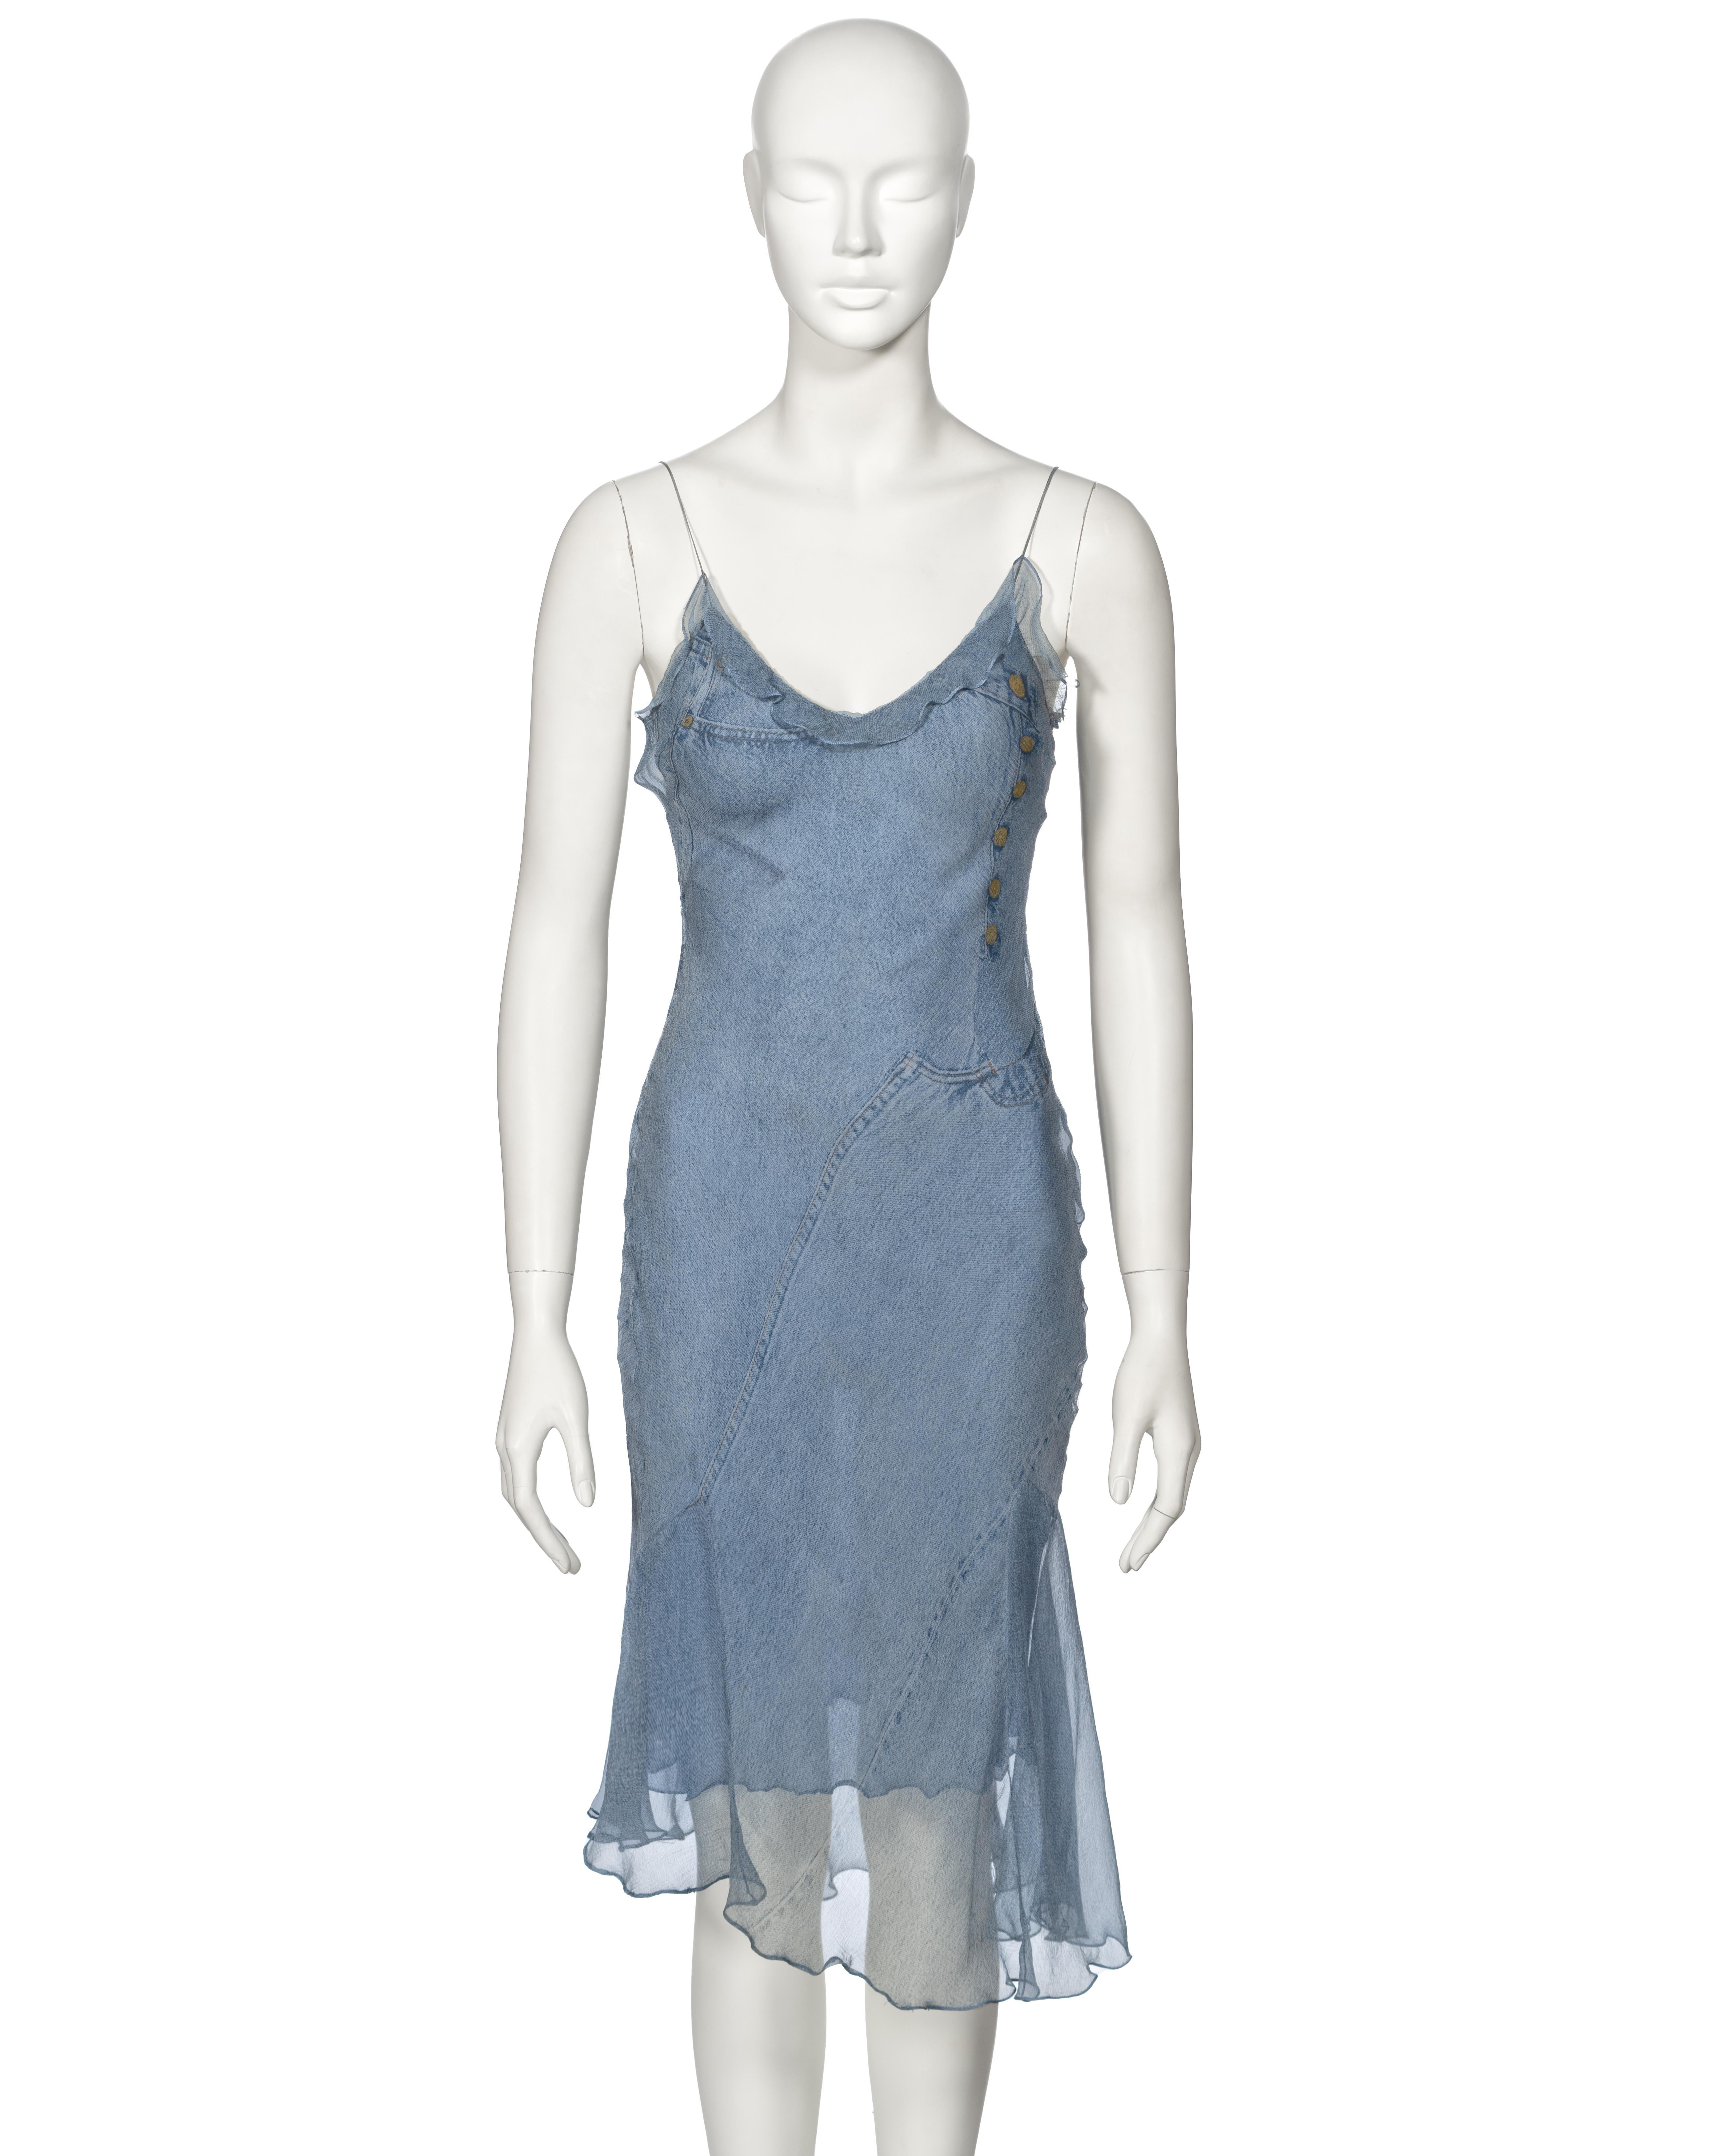 ▪ Archival Christian Dior Dress
▪ Creative Director: John Galliano
▪ Spring-Summer 2000
▪ Sold by One of a Kind Archive
▪ Constructed from two layers of bias-cut silk 
▪ Features an allover trompe l'oeil print resembling blue denim jeans 
▪ Ruffled